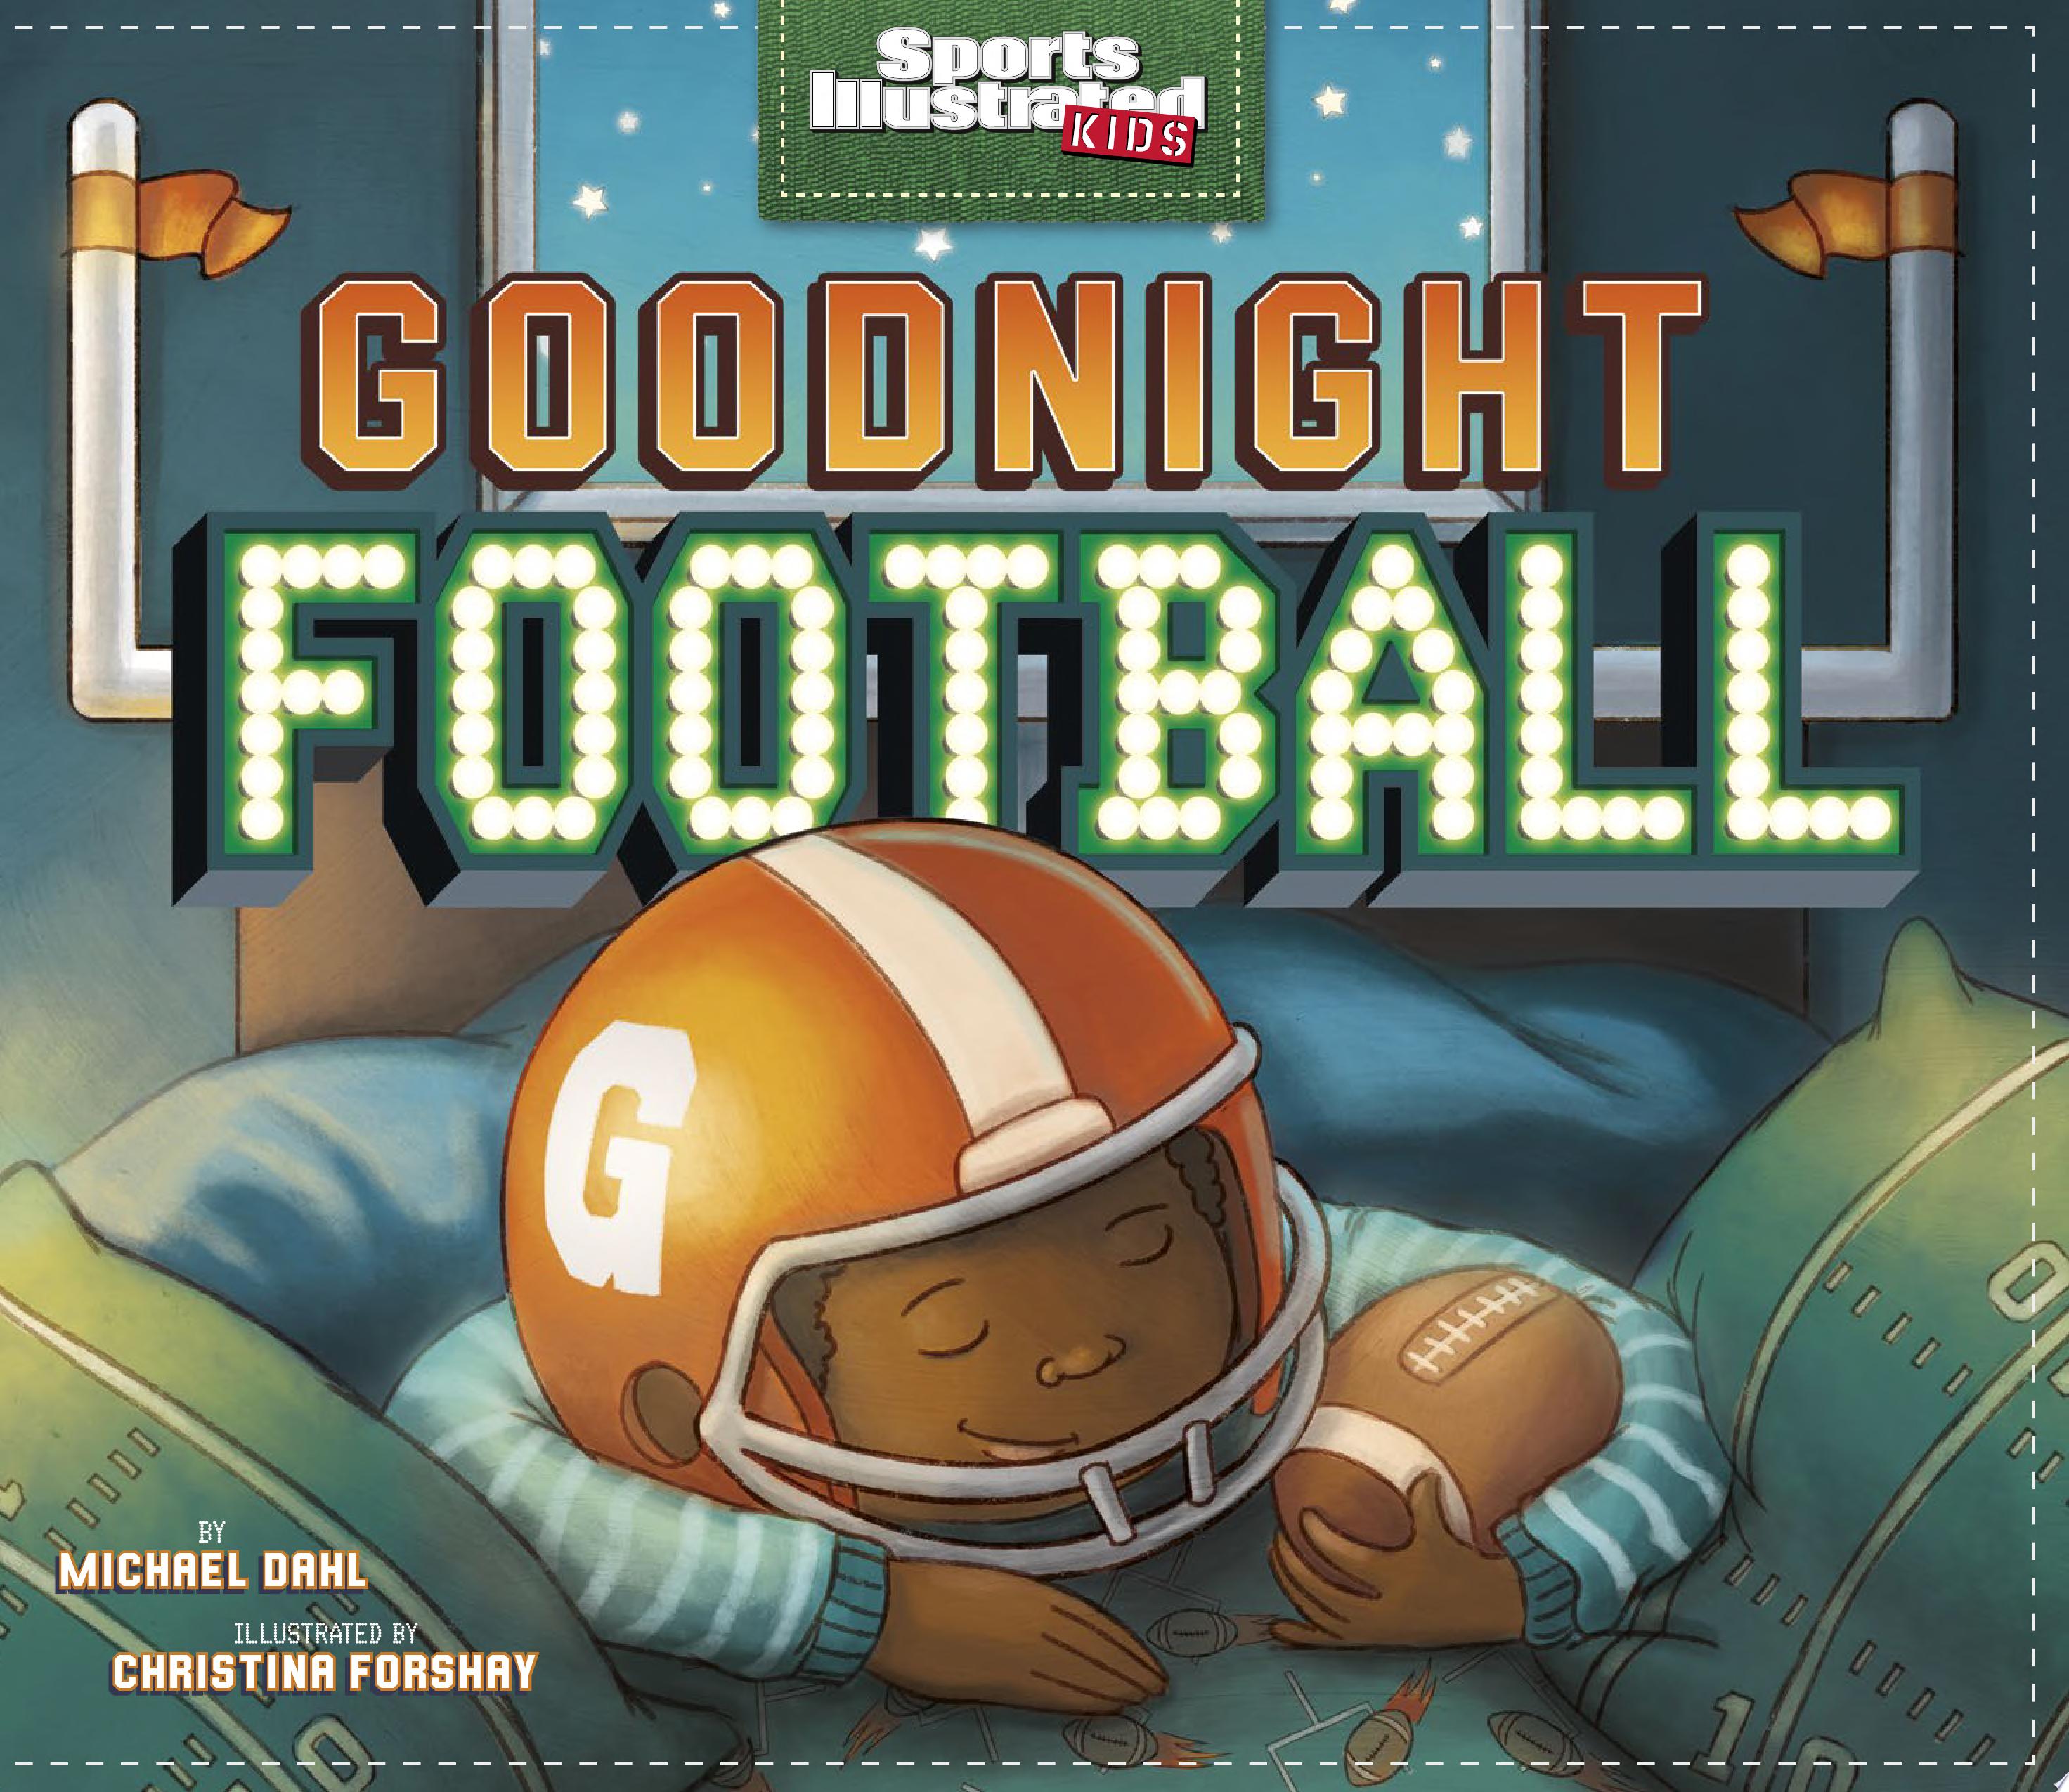 Image for "Goodnight Football"